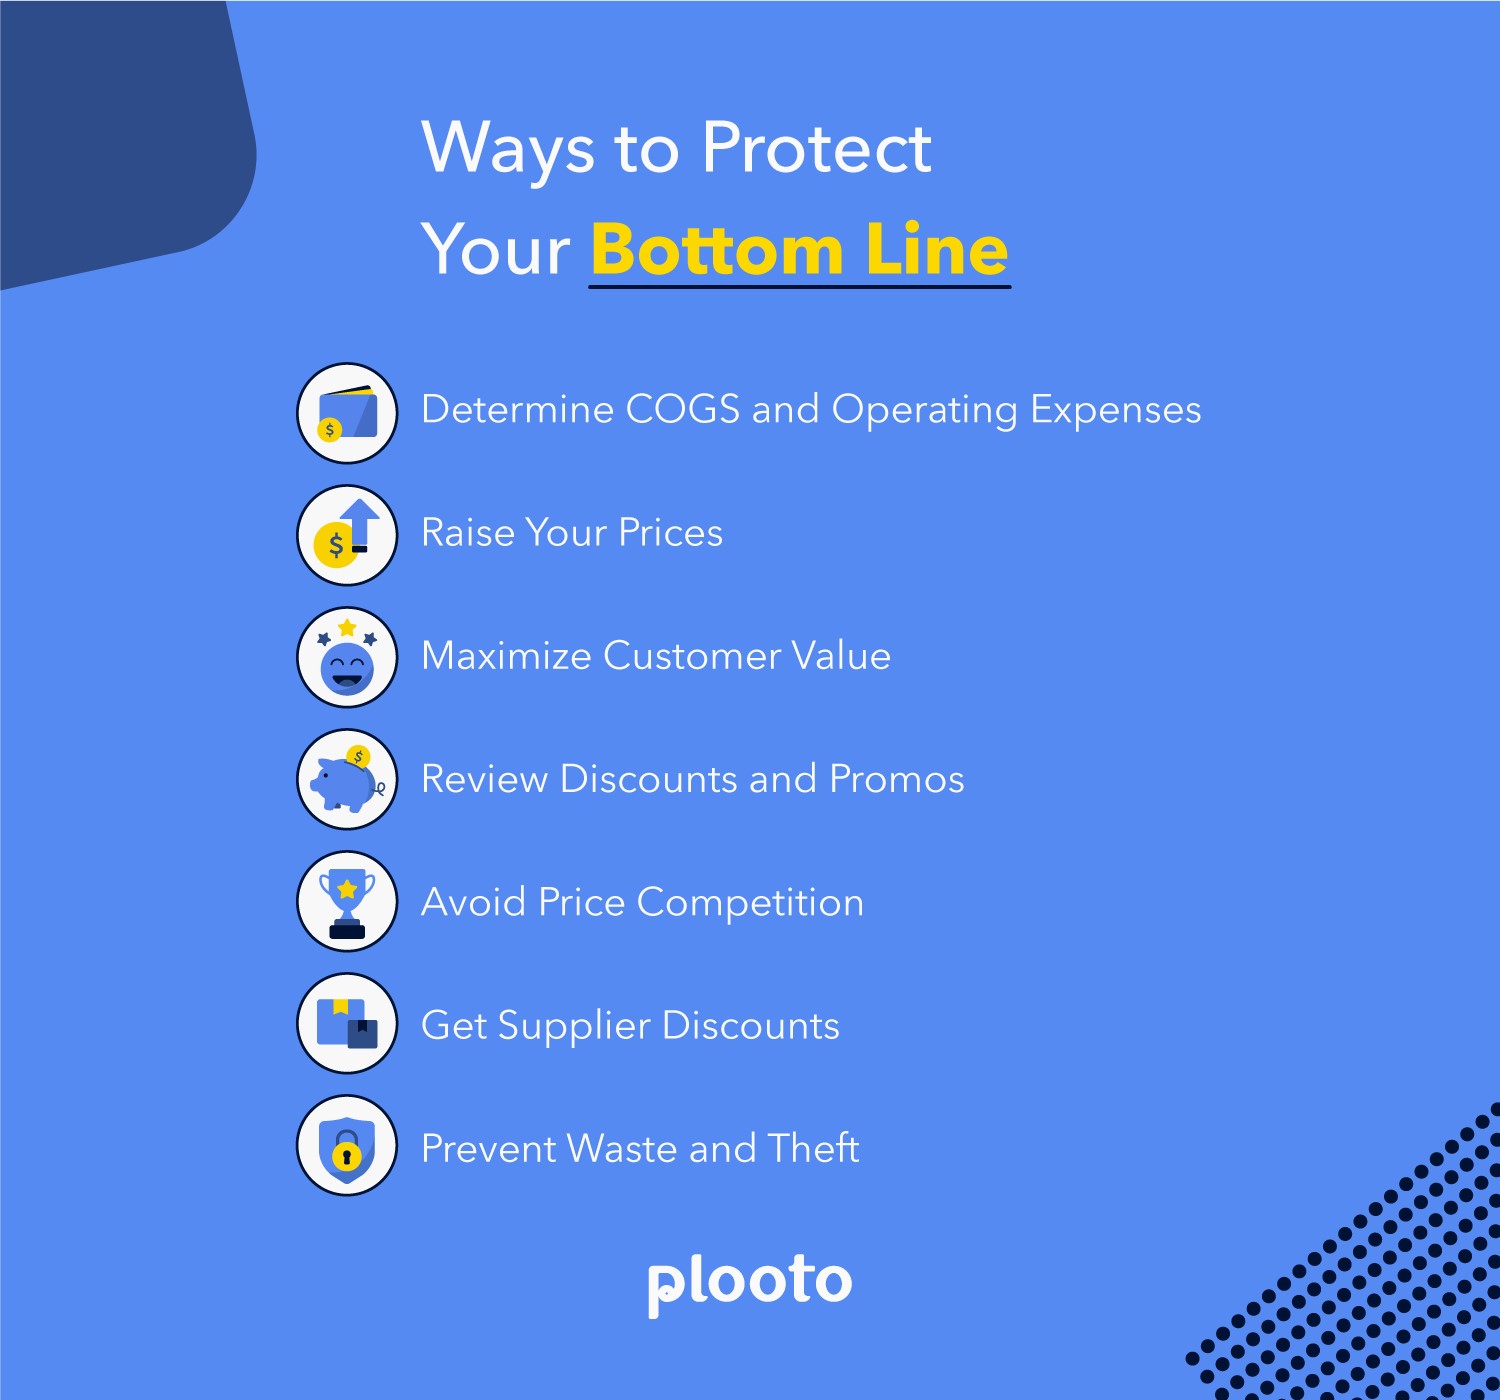 Ways-to-Protect-Your-Bottom-Line